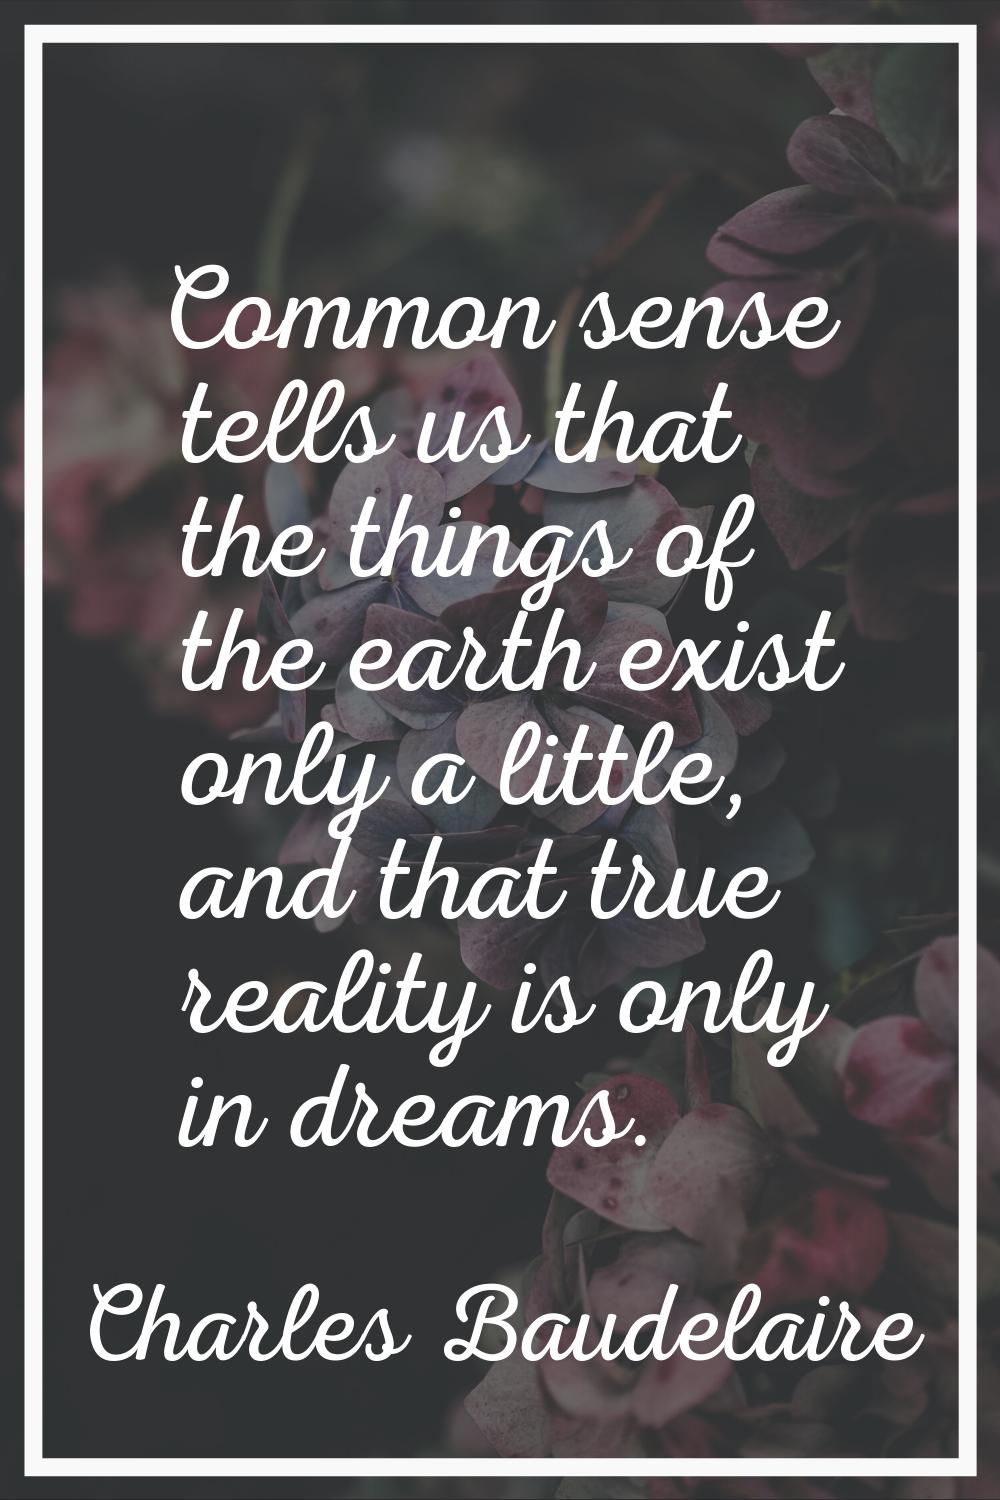 Common sense tells us that the things of the earth exist only a little, and that true reality is on